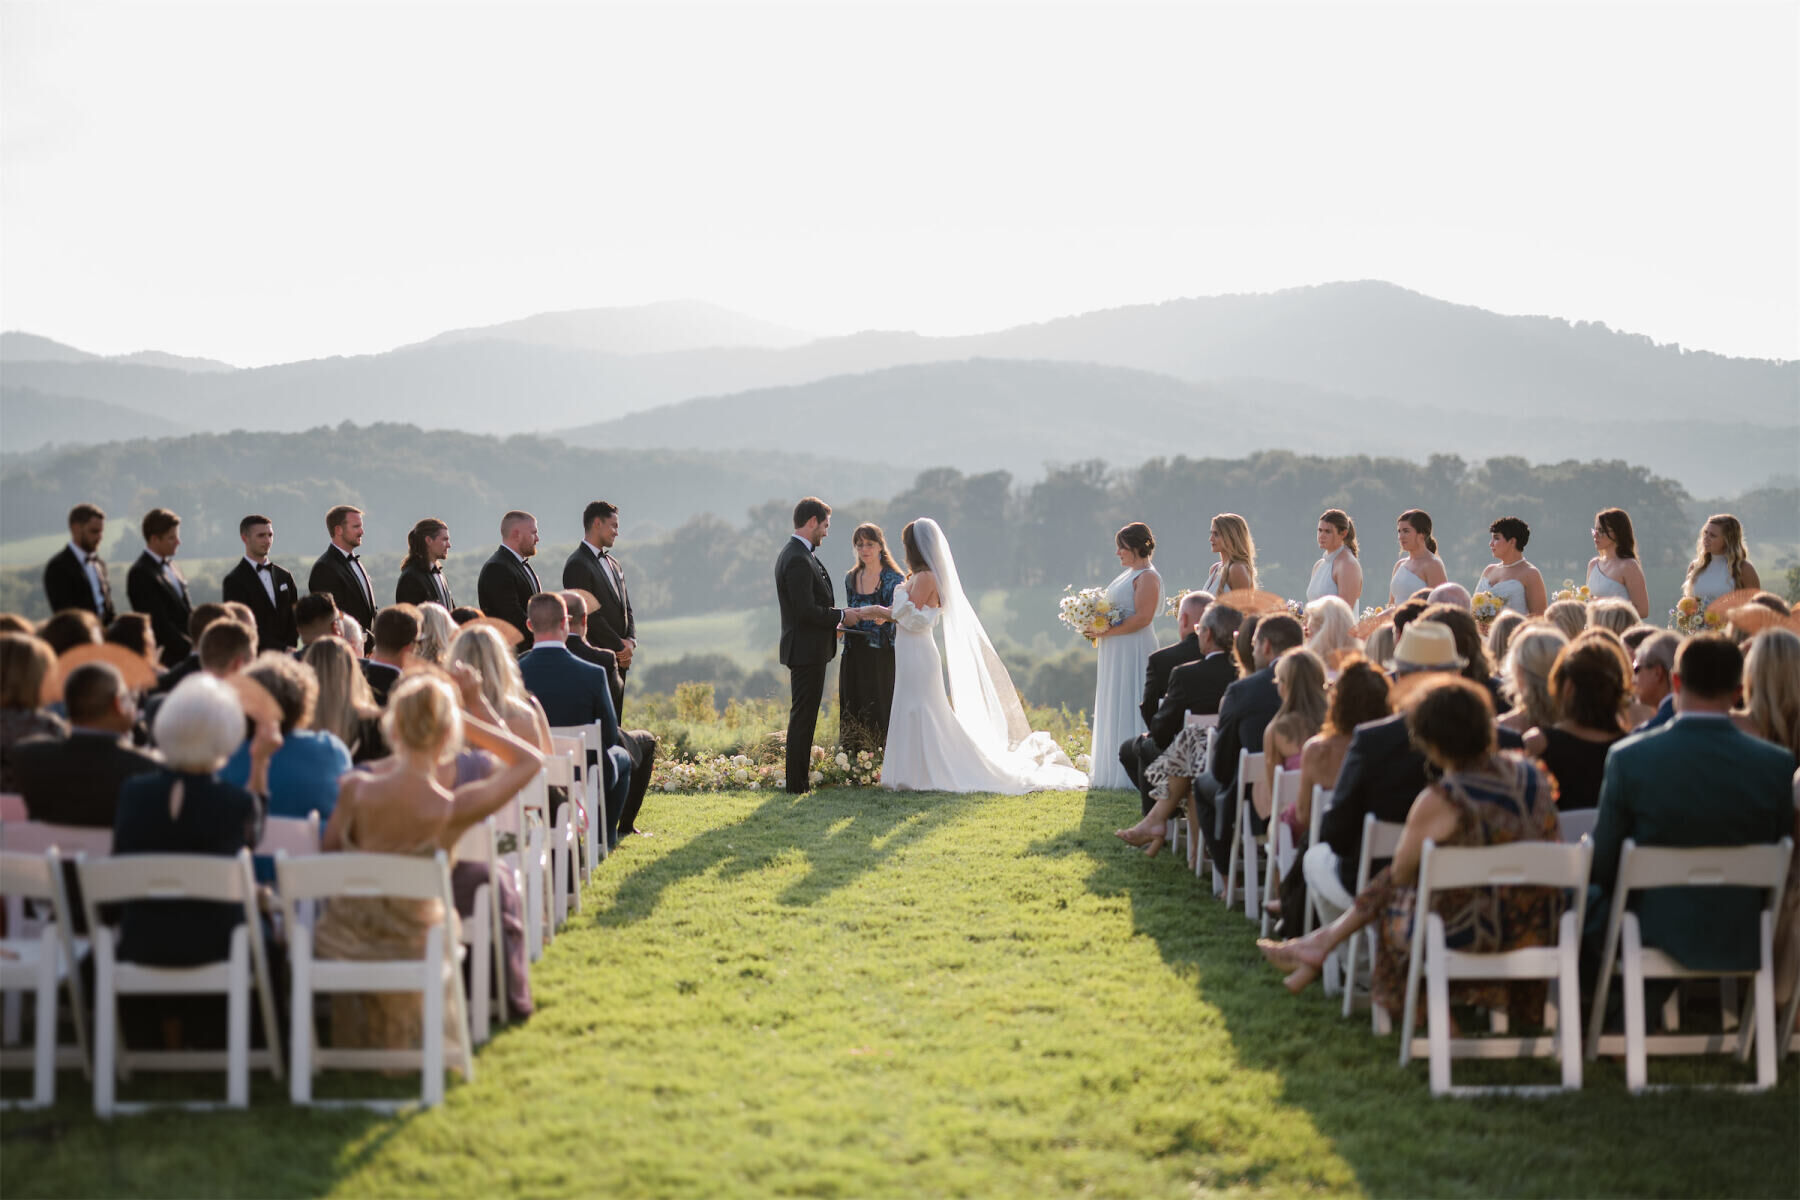 An outdoor ceremony on a lawn at Pippin Hill Farm & Vineyards with mountain views behind the bride and groom.